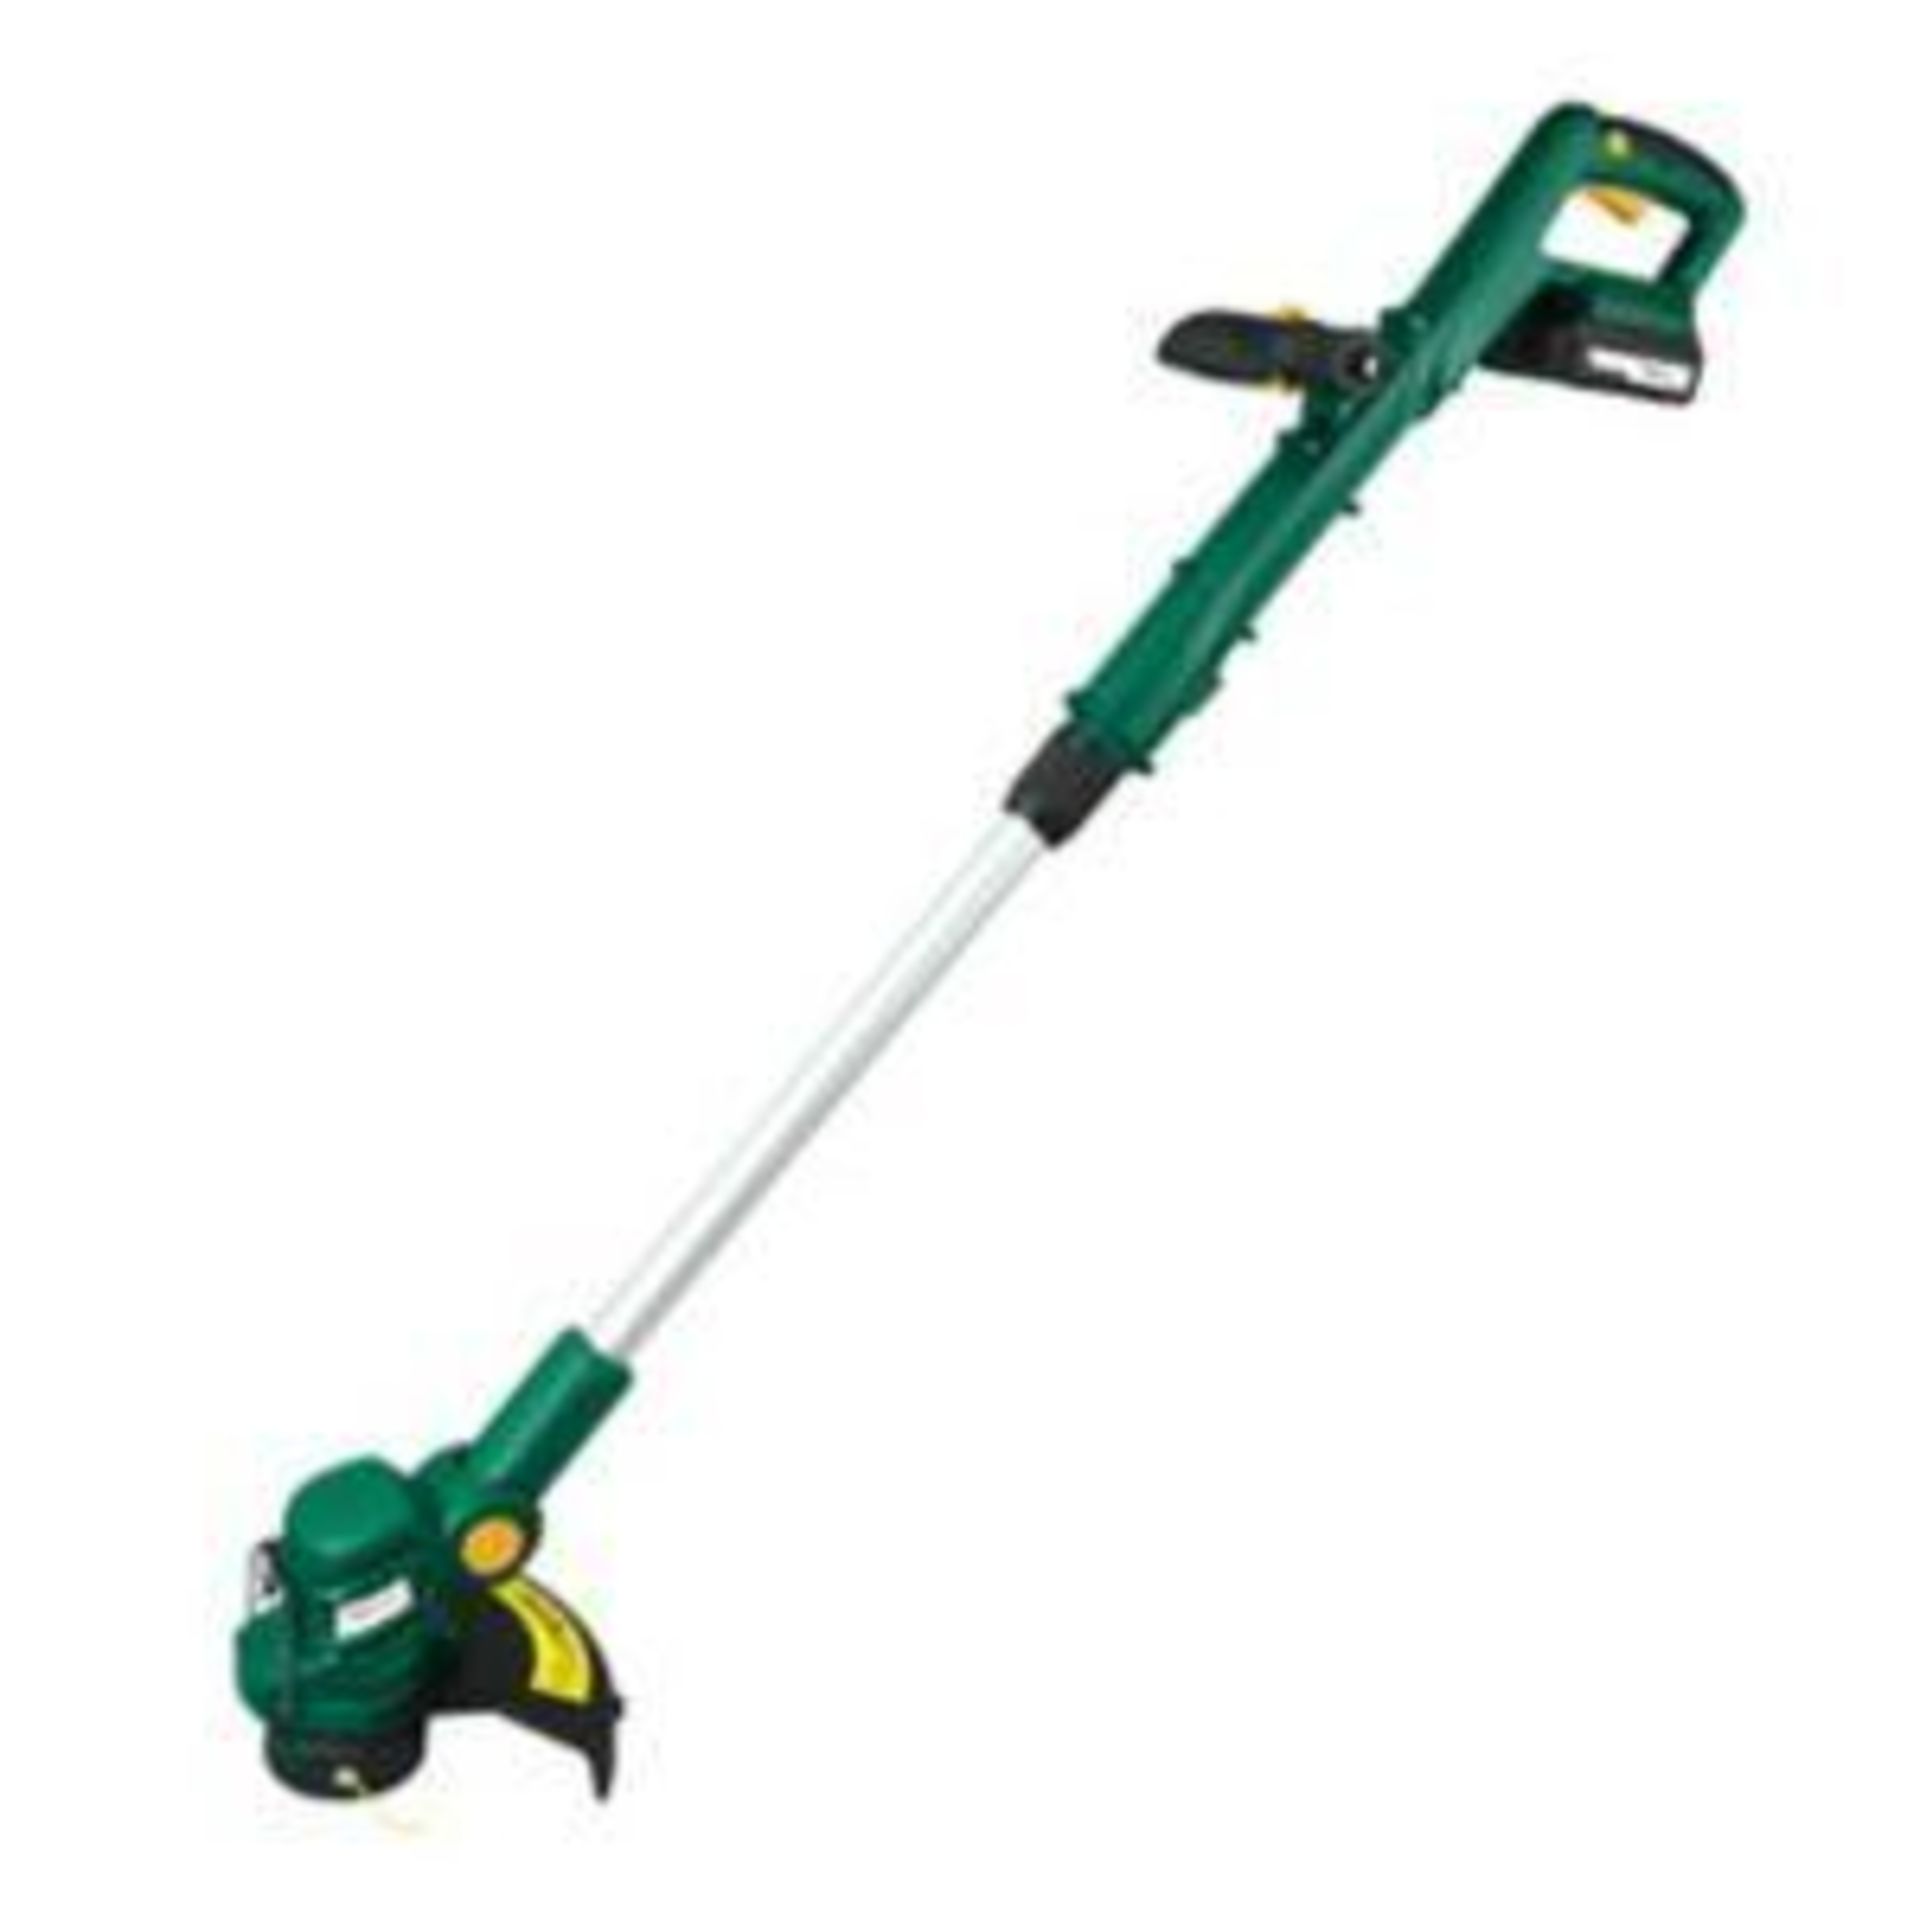 18V 230mm Cordless Grass Trimmer Nmgt18-Li - R45. 23cm cordless grass trimmer with telescopic